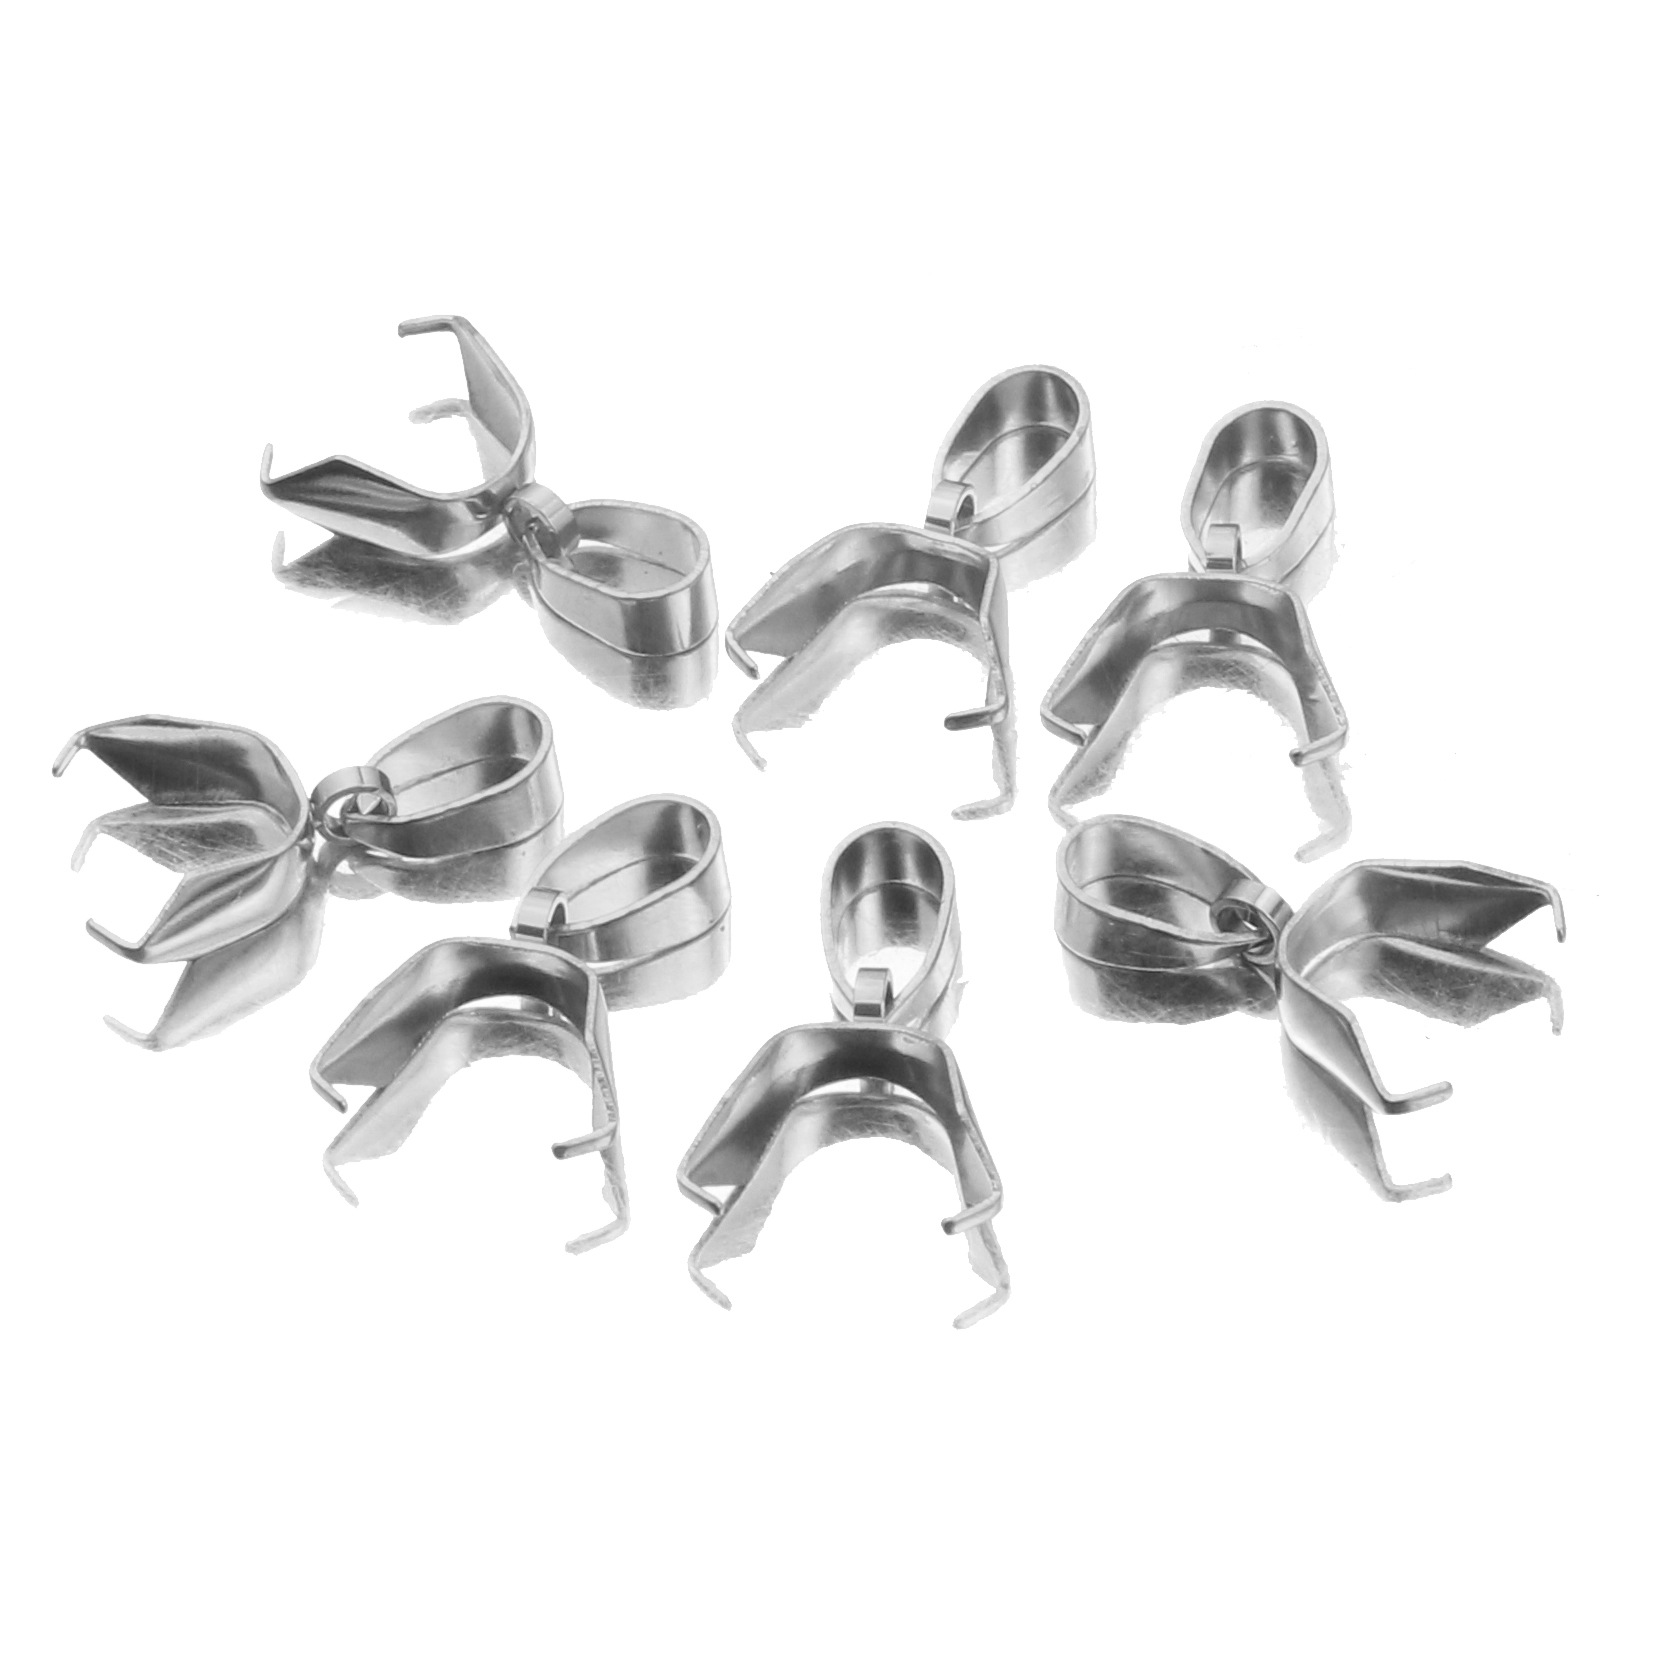 Stainless steel natural color 4x16mm